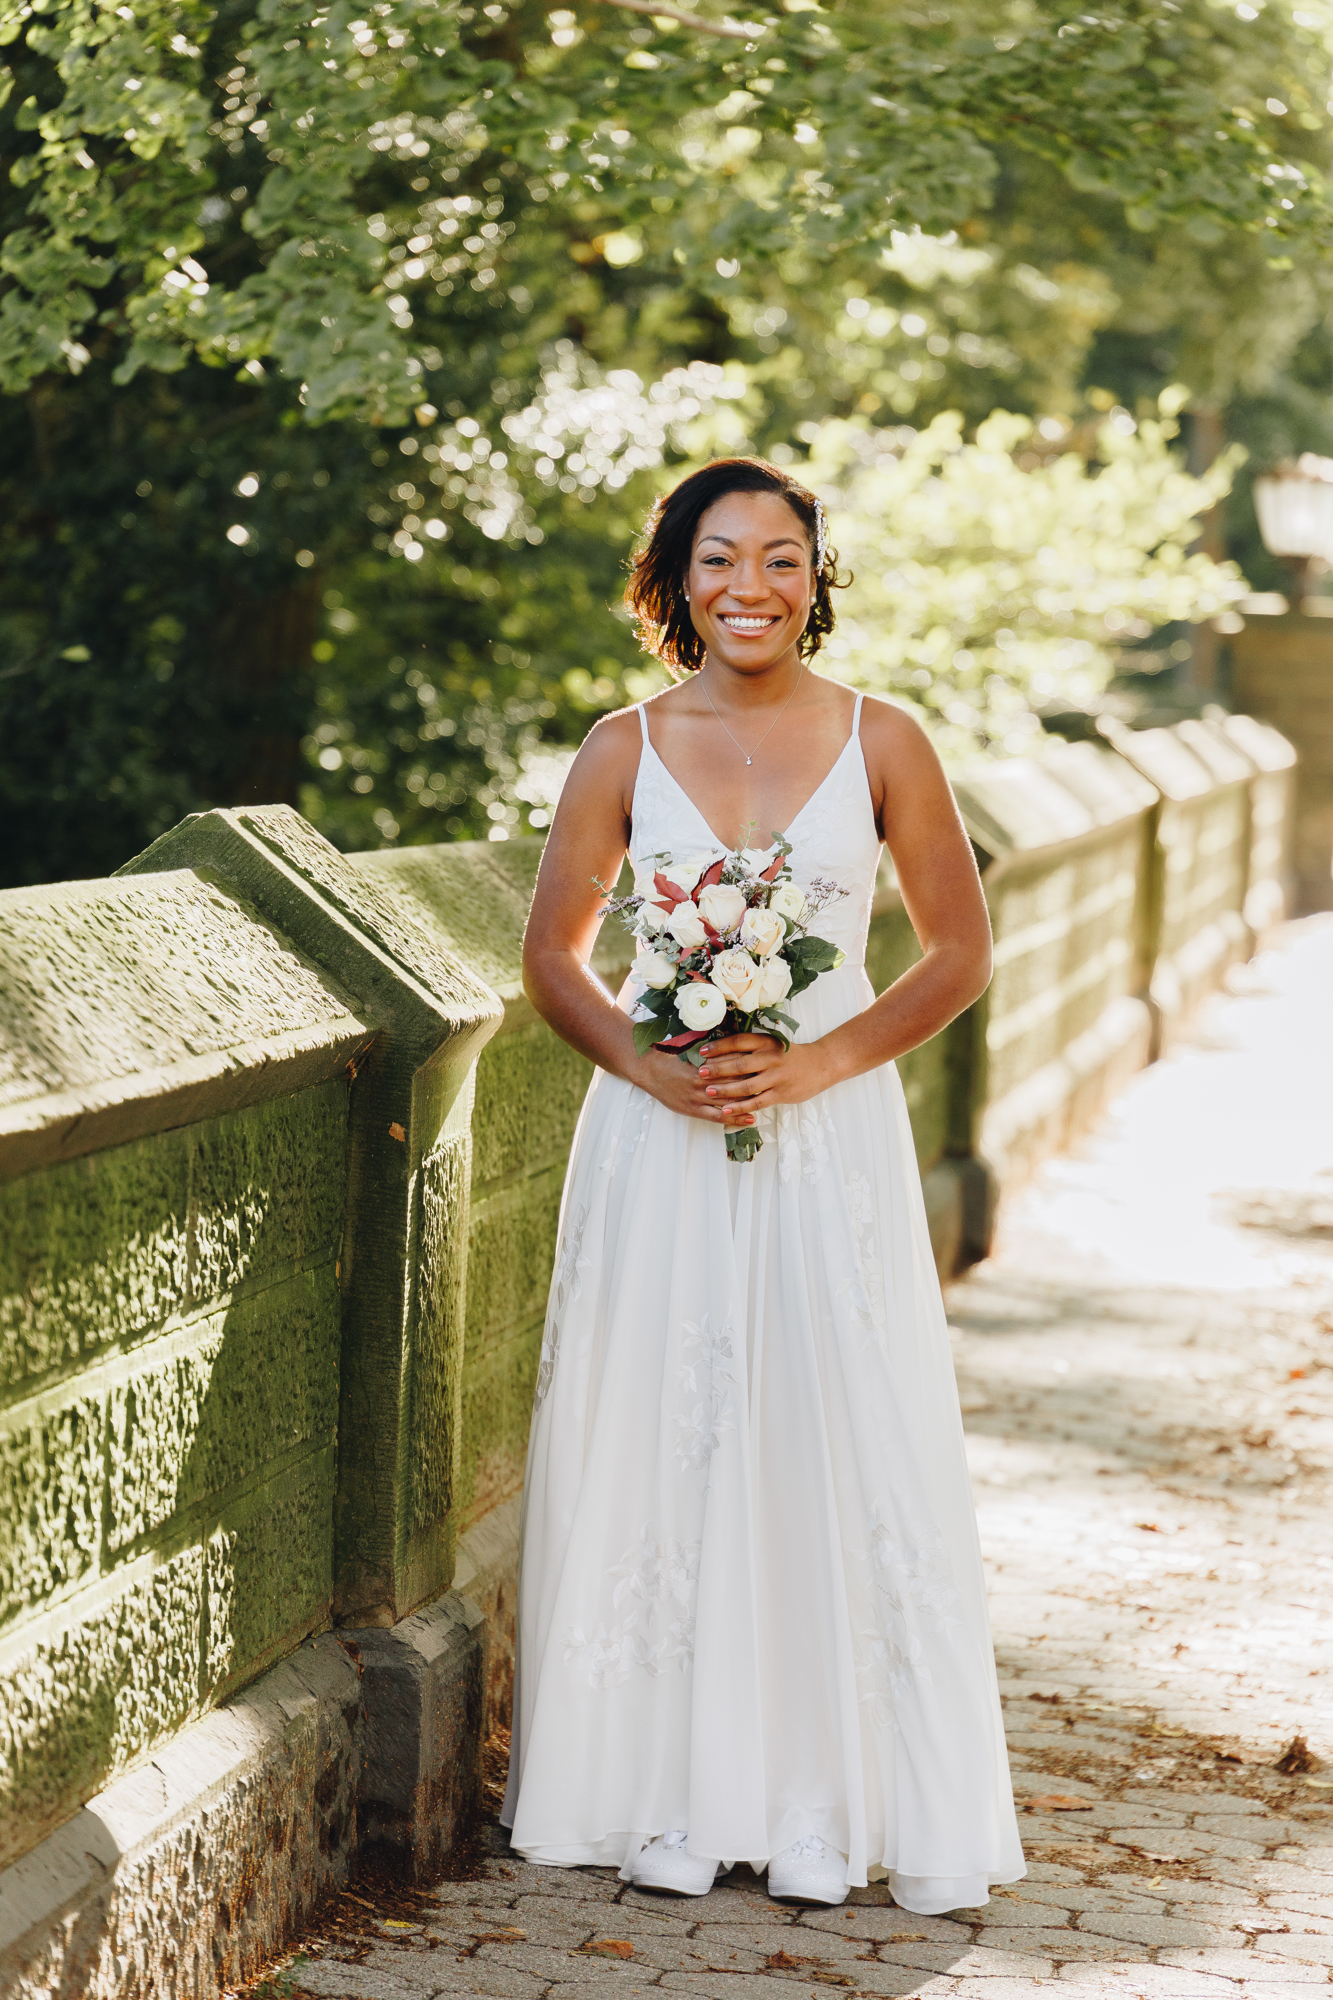 Intimate Central Park Wedding Photos in New York City